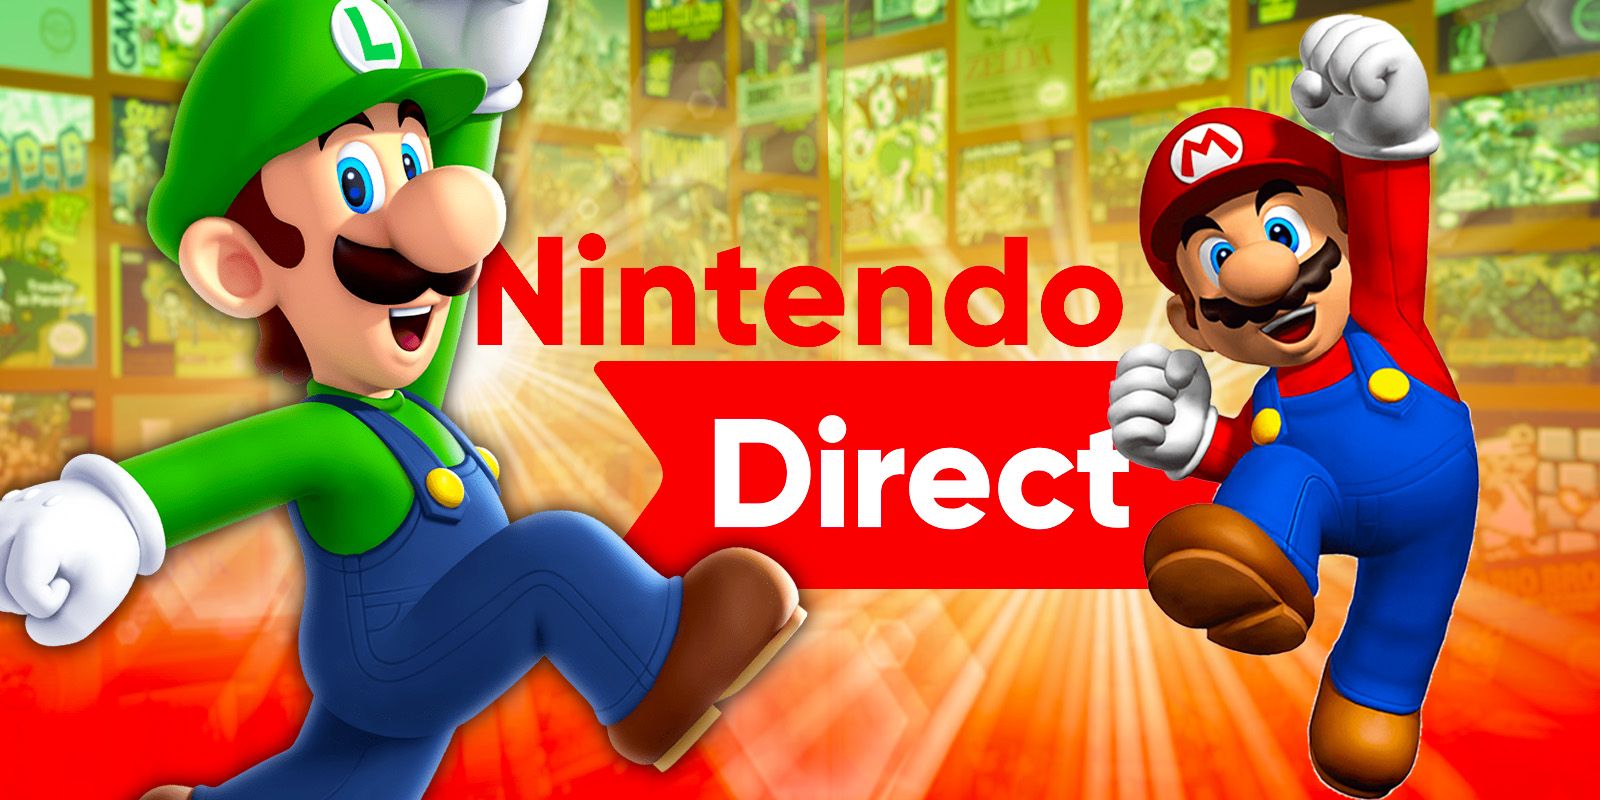 Luigi and Mario jumping on each side of a Nintendo Direct logo.